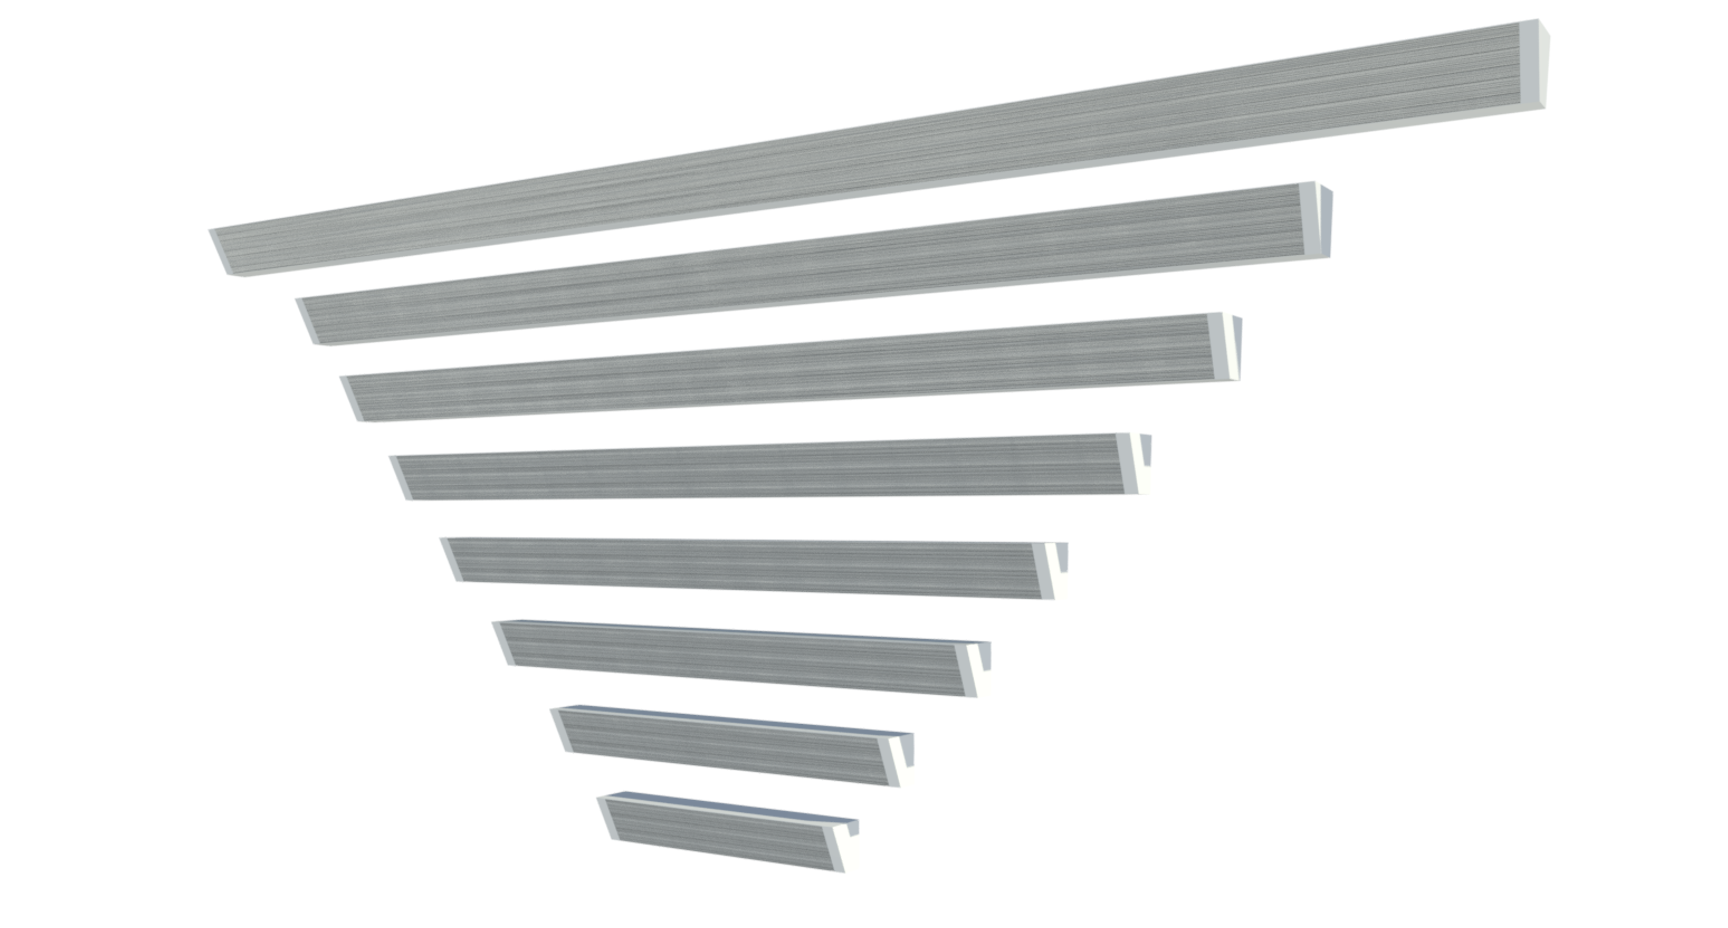 A render of multiple metallic, wall-mounted cove heaters from manufacturer King in multiple lengths, bending at an angle, so can be placed along a wall and ceiling  